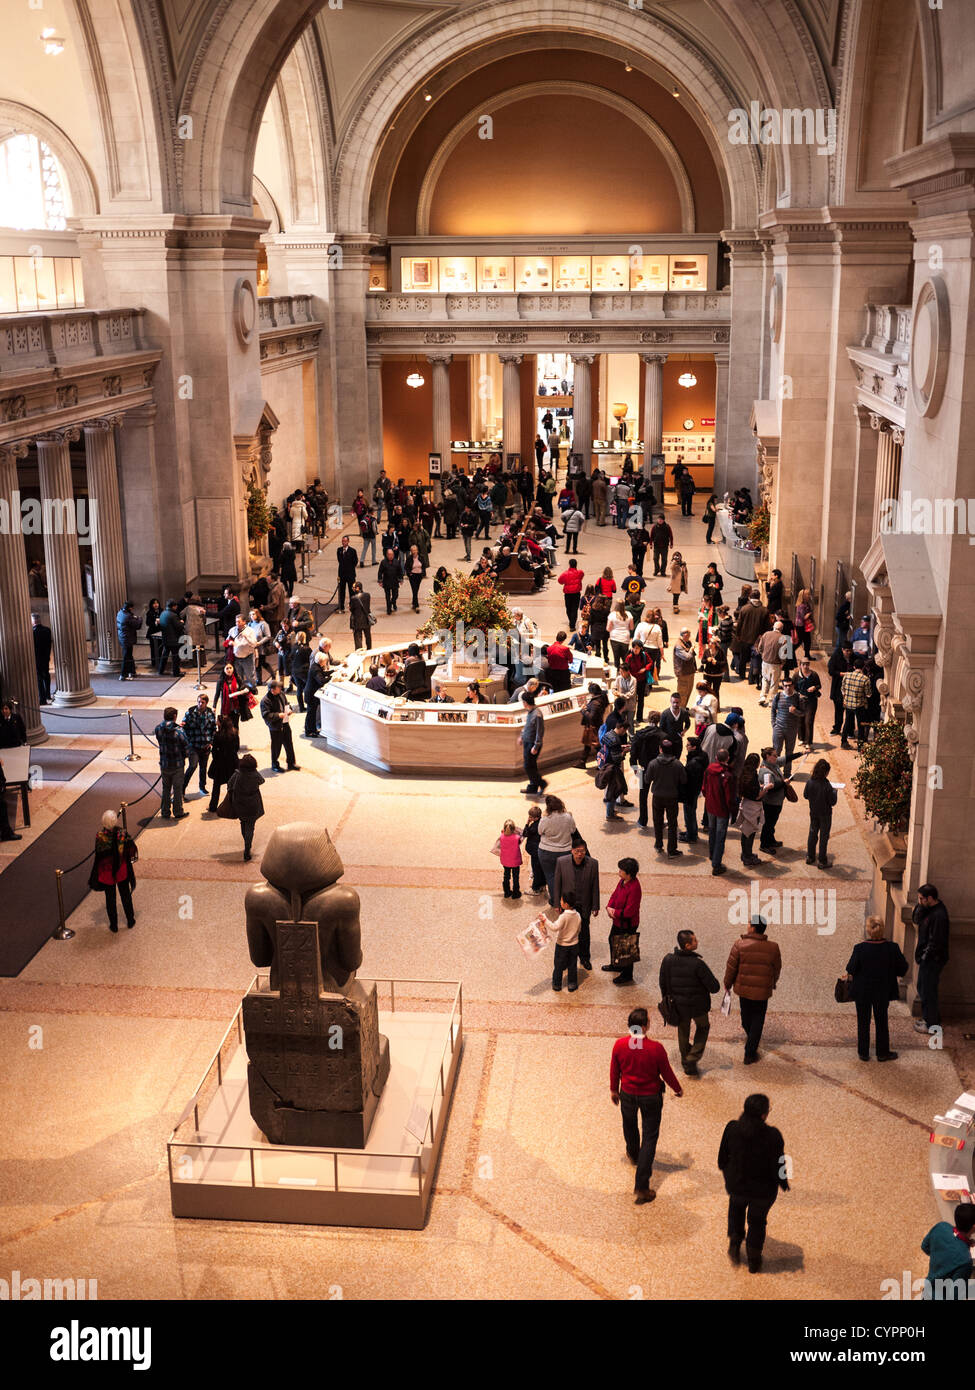 NEW YORK, NY - The main entrance hall at the Metropolitan Museum of Art in New York, New York. Stock Photo